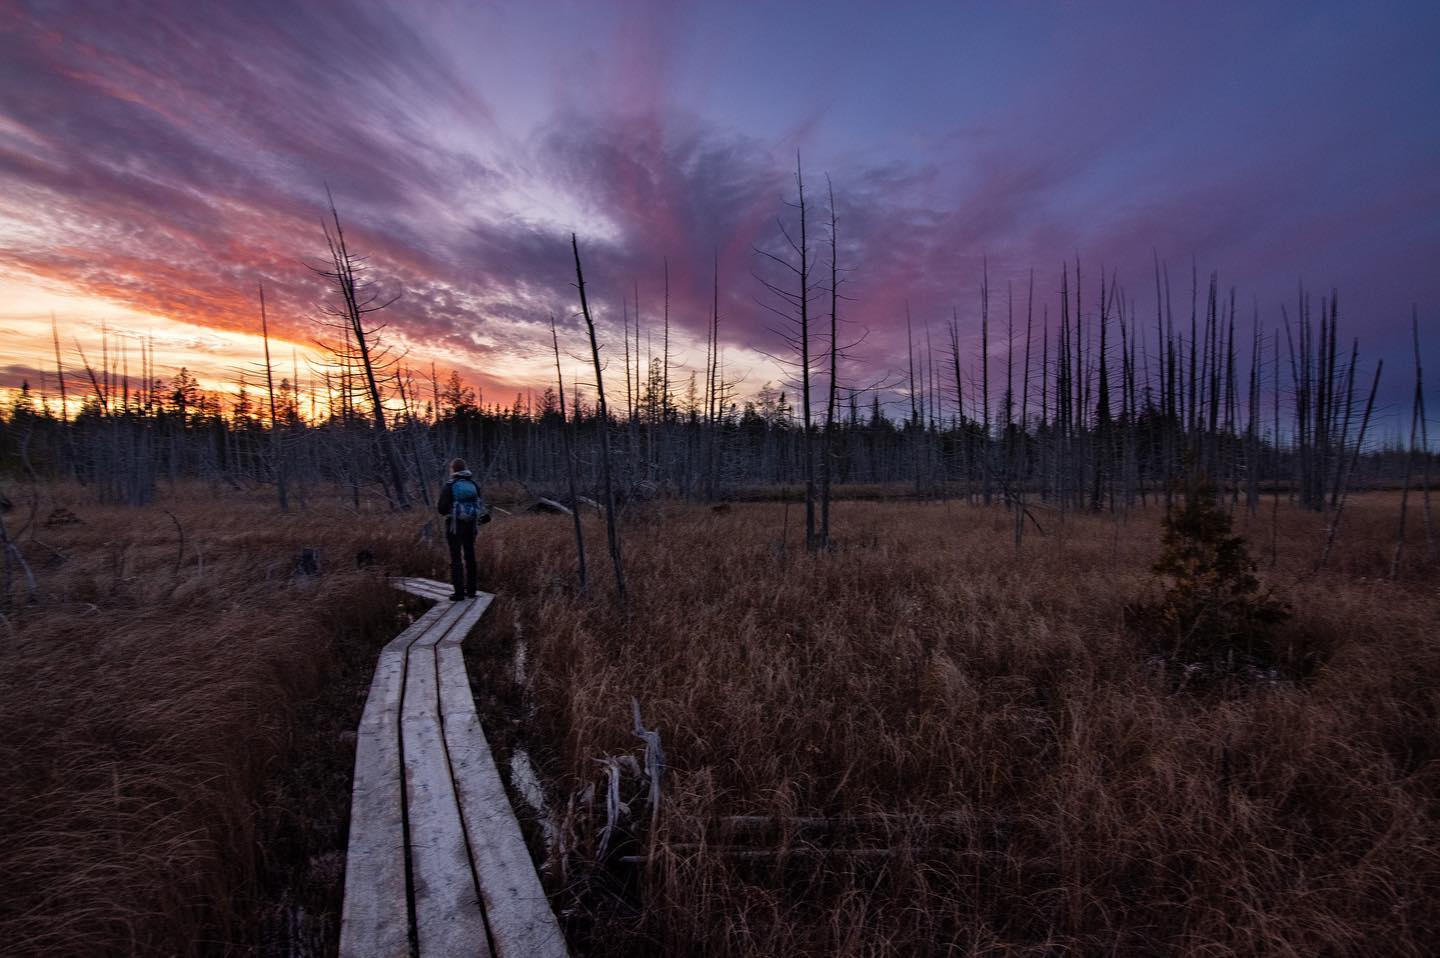 wide shot of a person with a backpack from behind walking along a boardwalk under a purple and orange sky with bare trees